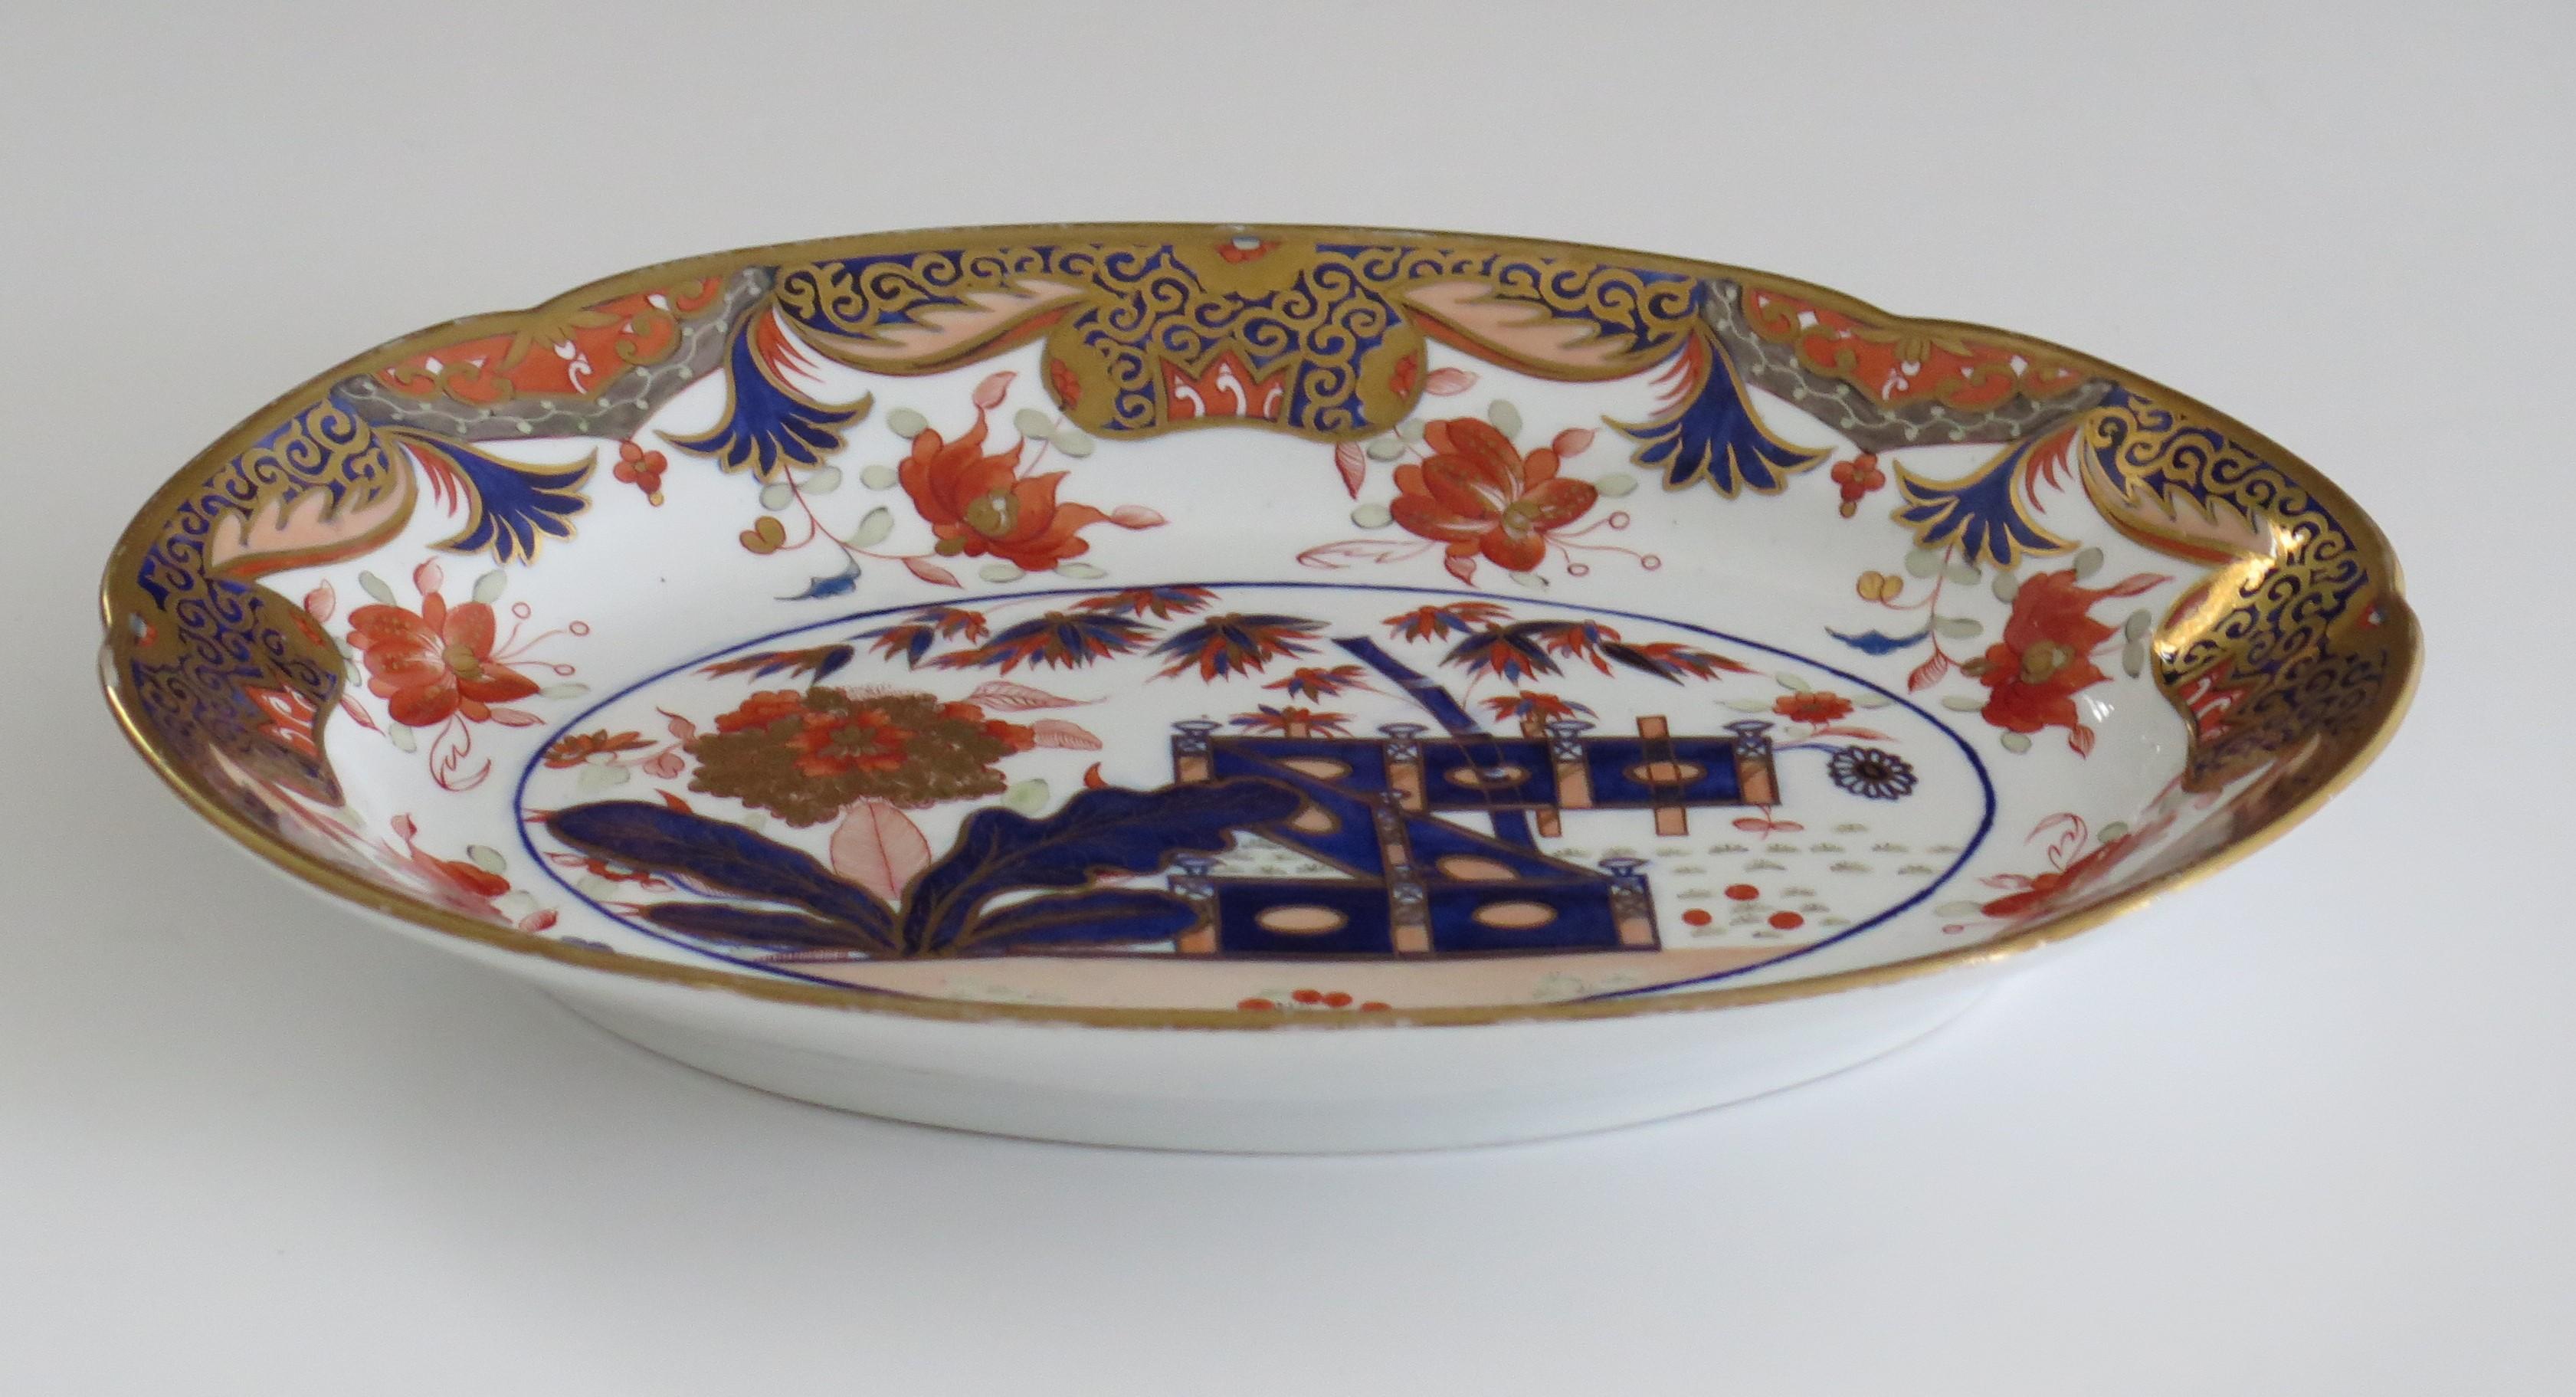 This is a fine example of an English George III period, porcelain serving platter or dish, made by Spode and hand painted in Pattern 967, during the early 19th century, circa 1815.

The platter or dish is oval in shape with a notched edge rim and